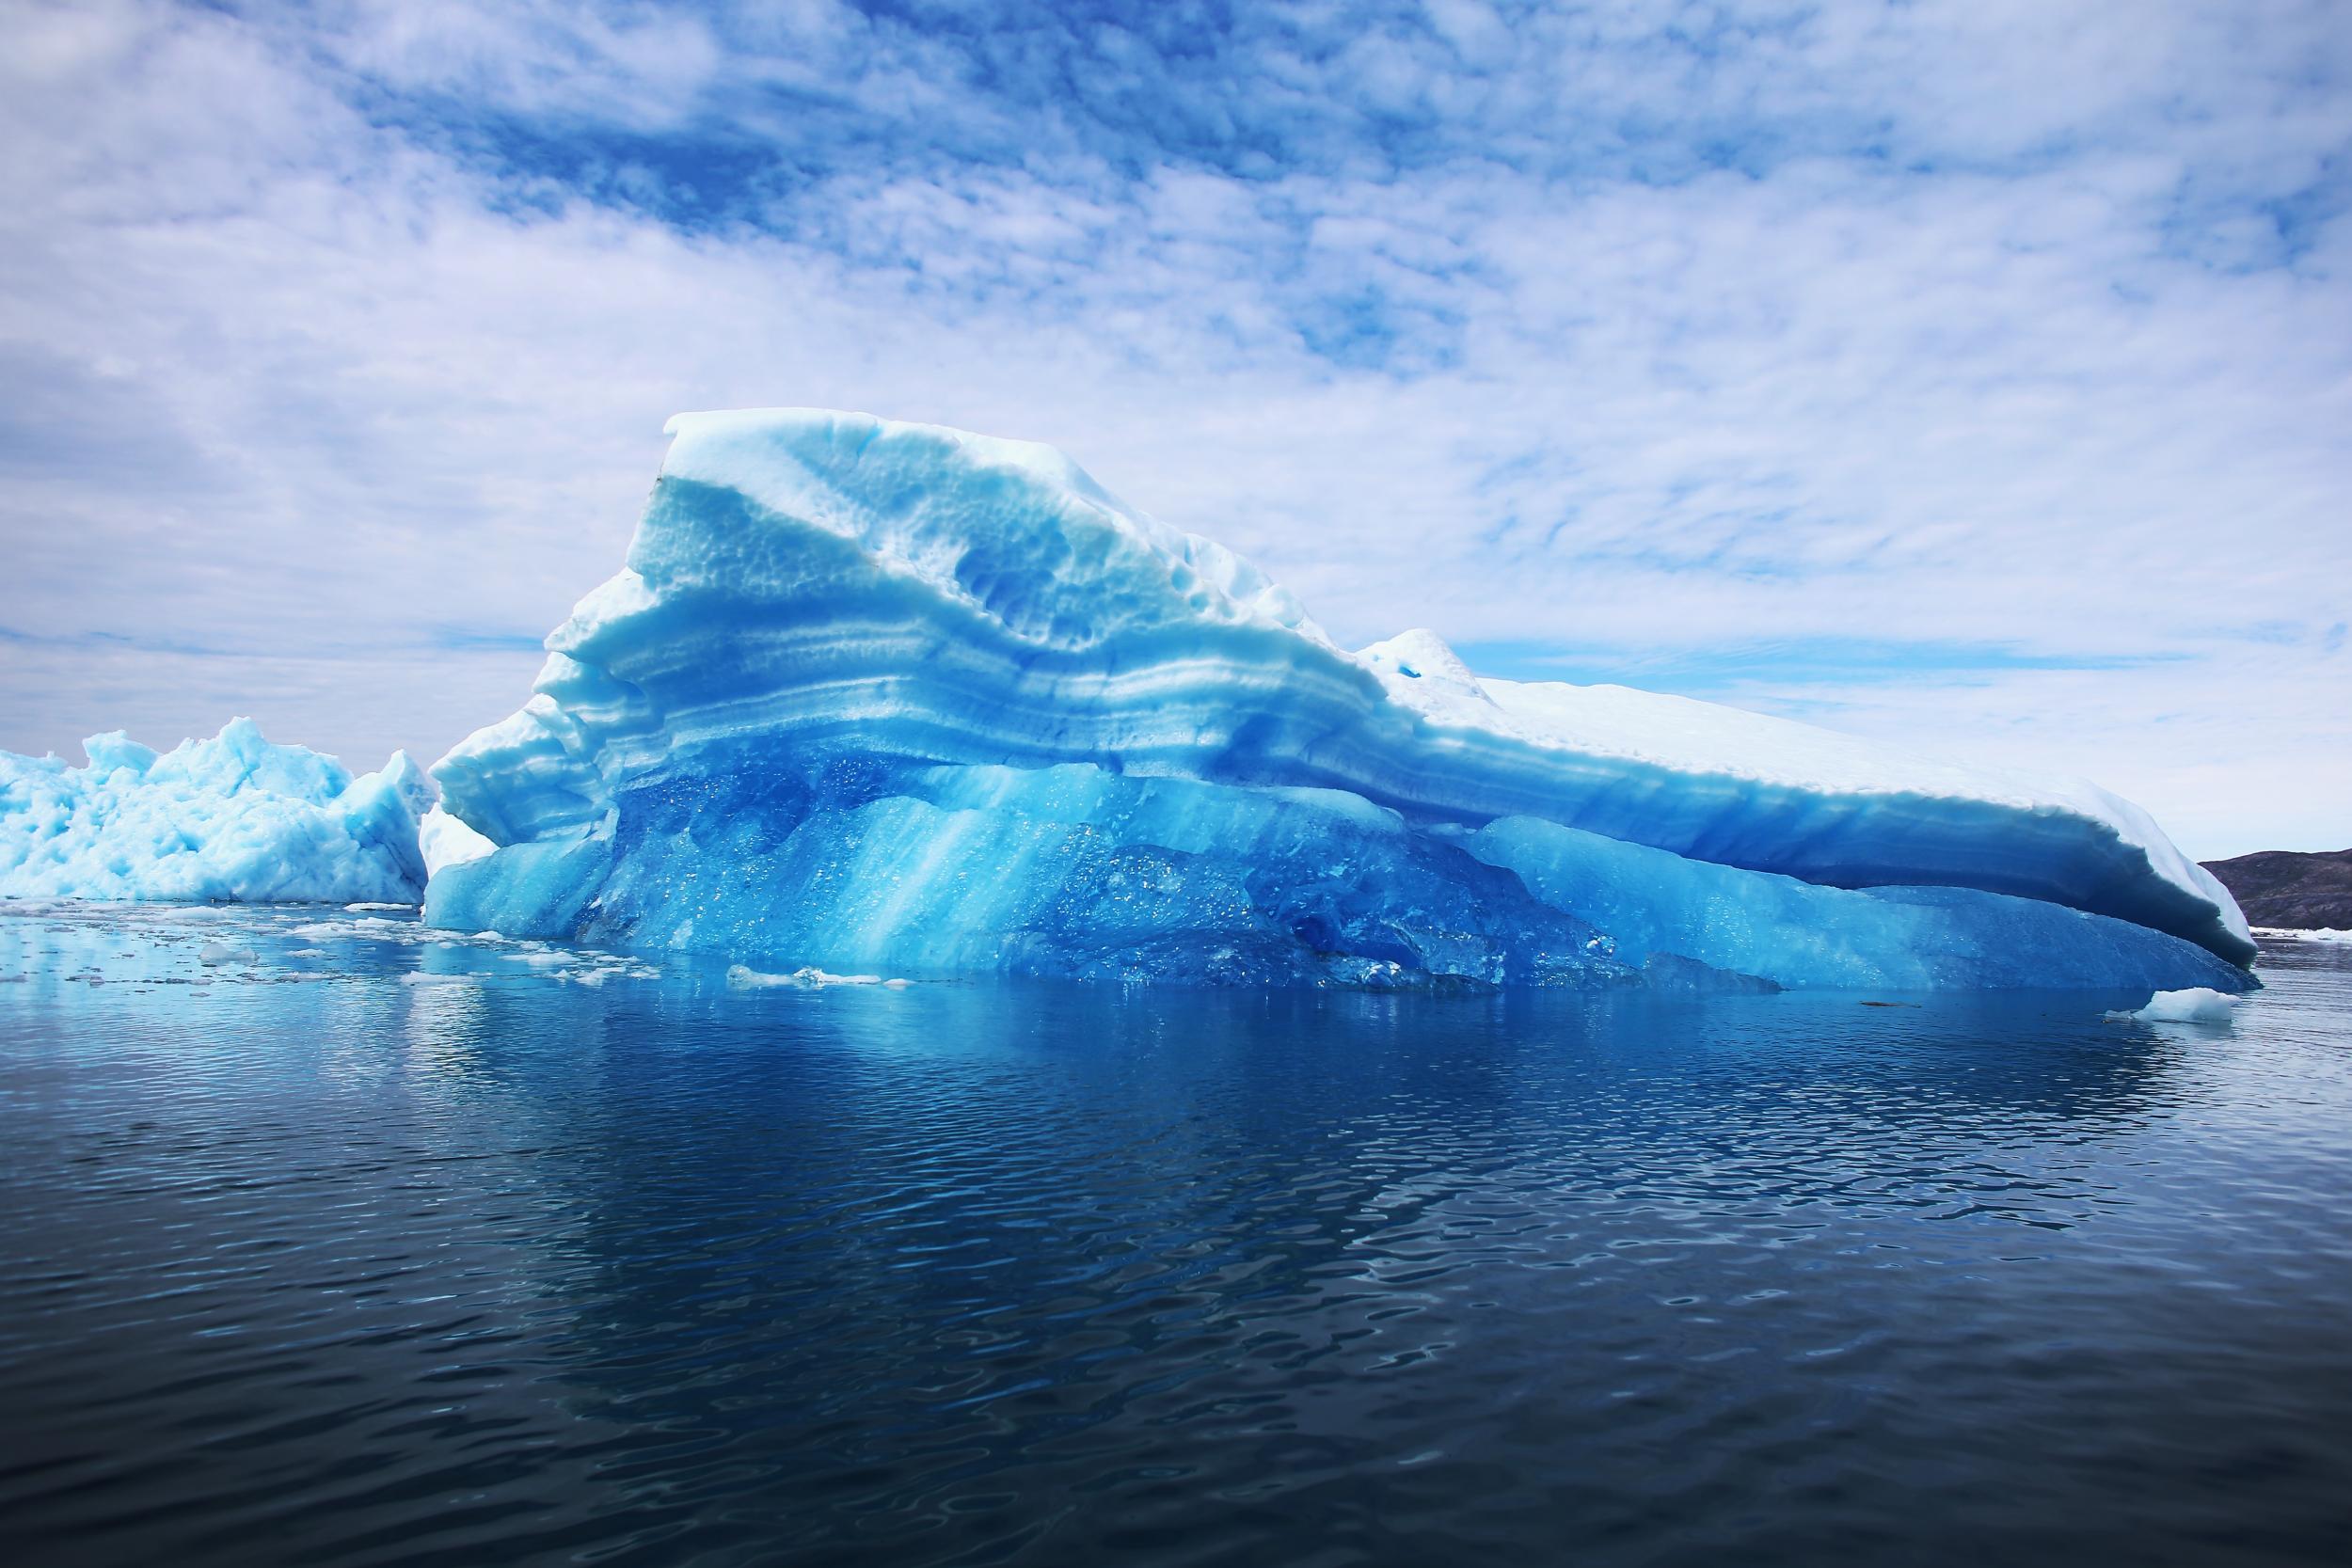 The tightly packed ice of Arctic icebergs thoroughly absorbs blue light, making them appear blue